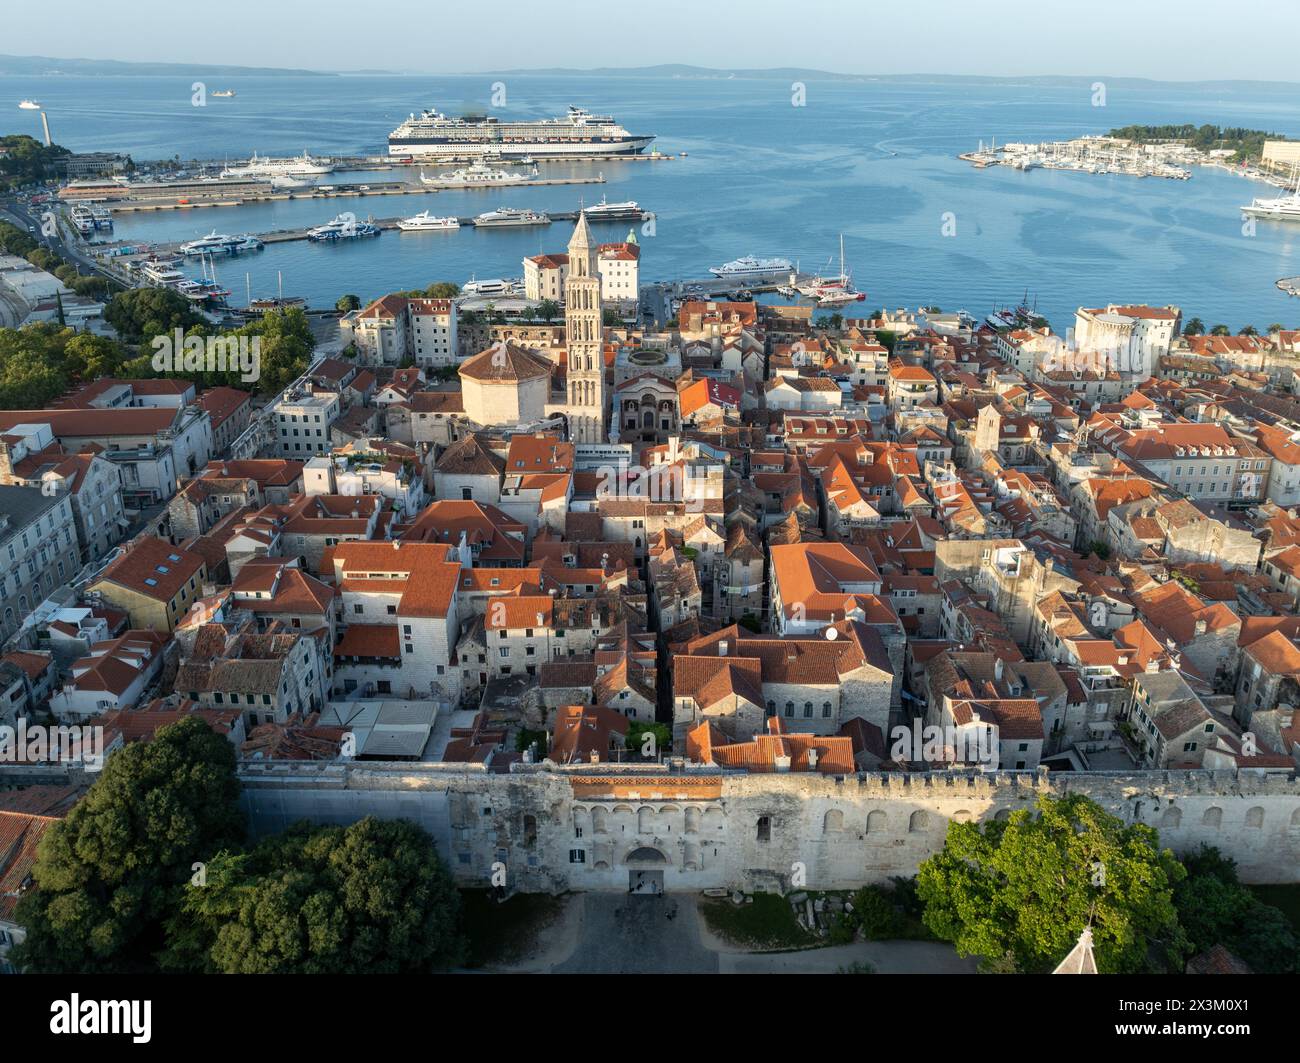 Aerial view of the old city of Split, Croatia. Stock Photo